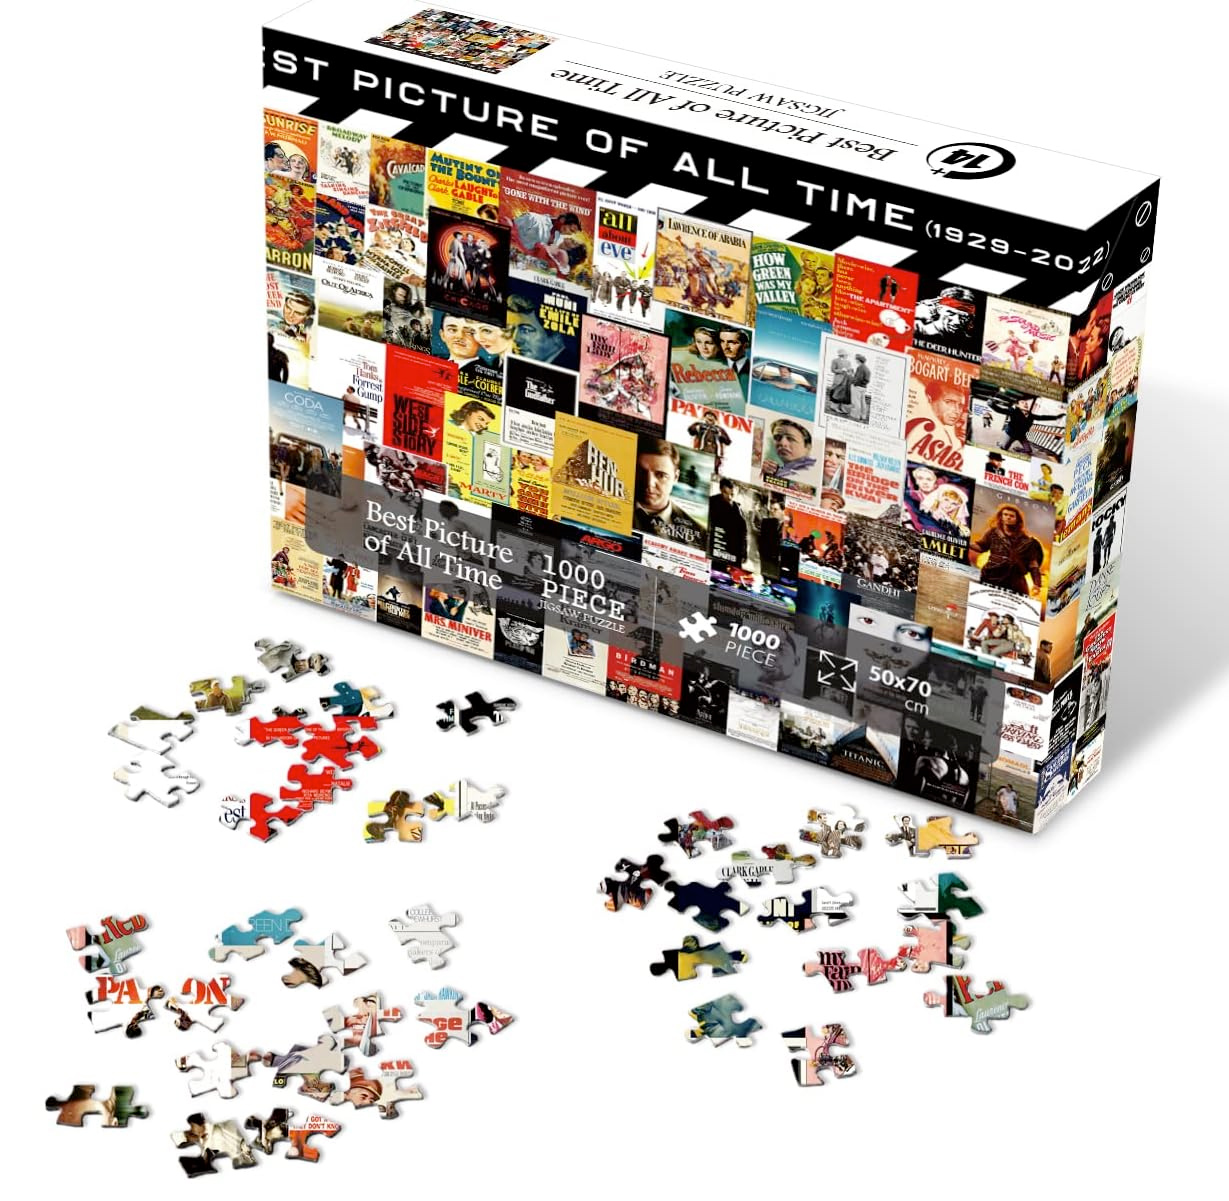 The Oscar Best Picture of All Time 1000 Pieces Jigsaw Puzzle